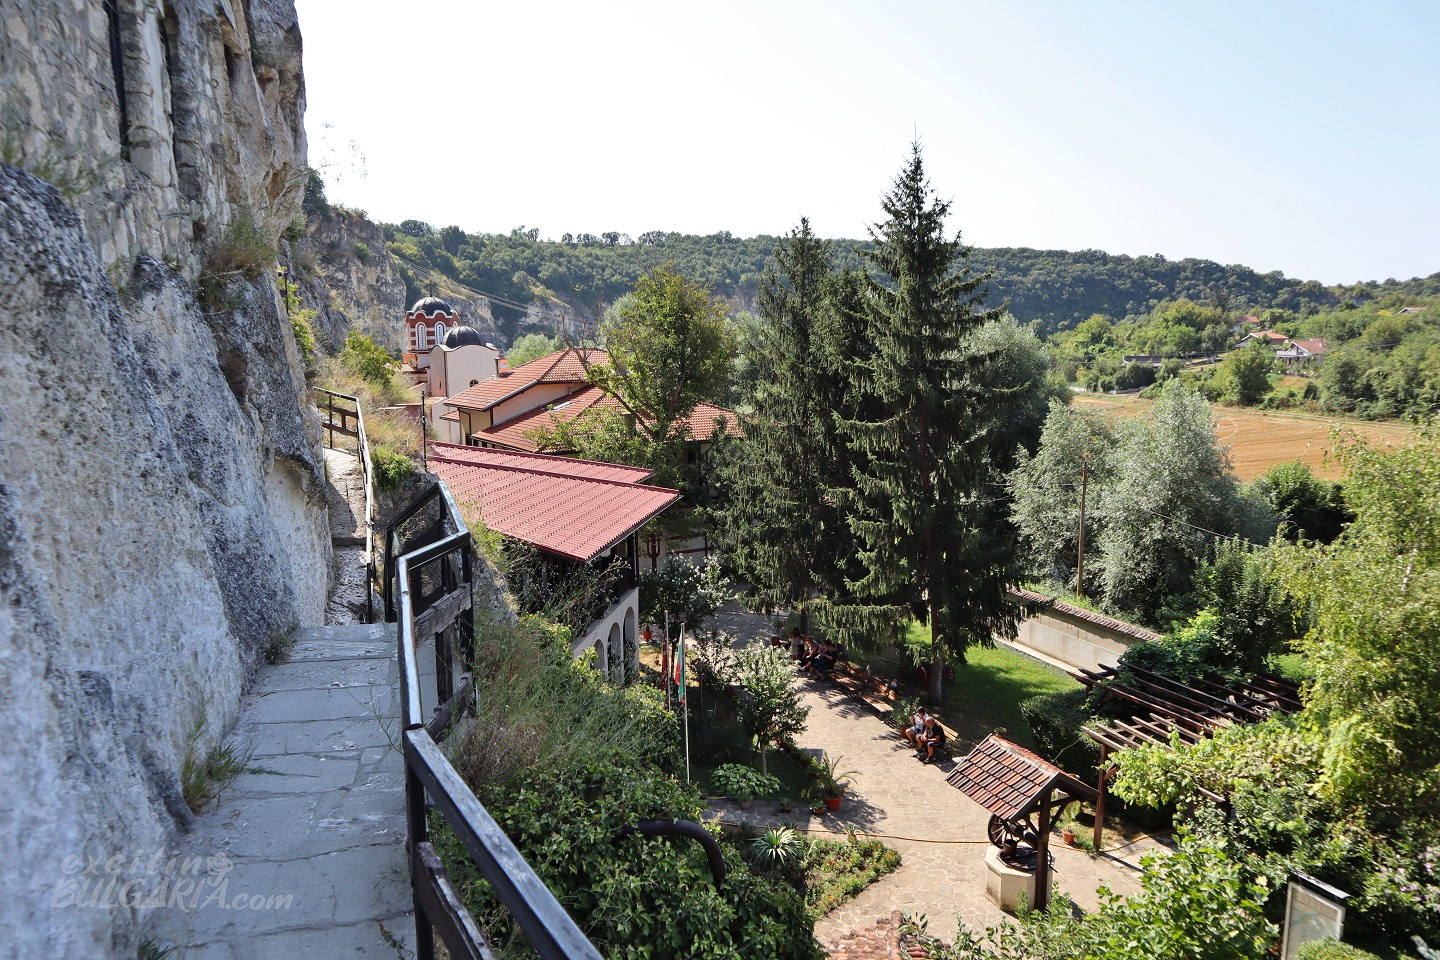 The view from the rocks of the Basarbovo Monastery